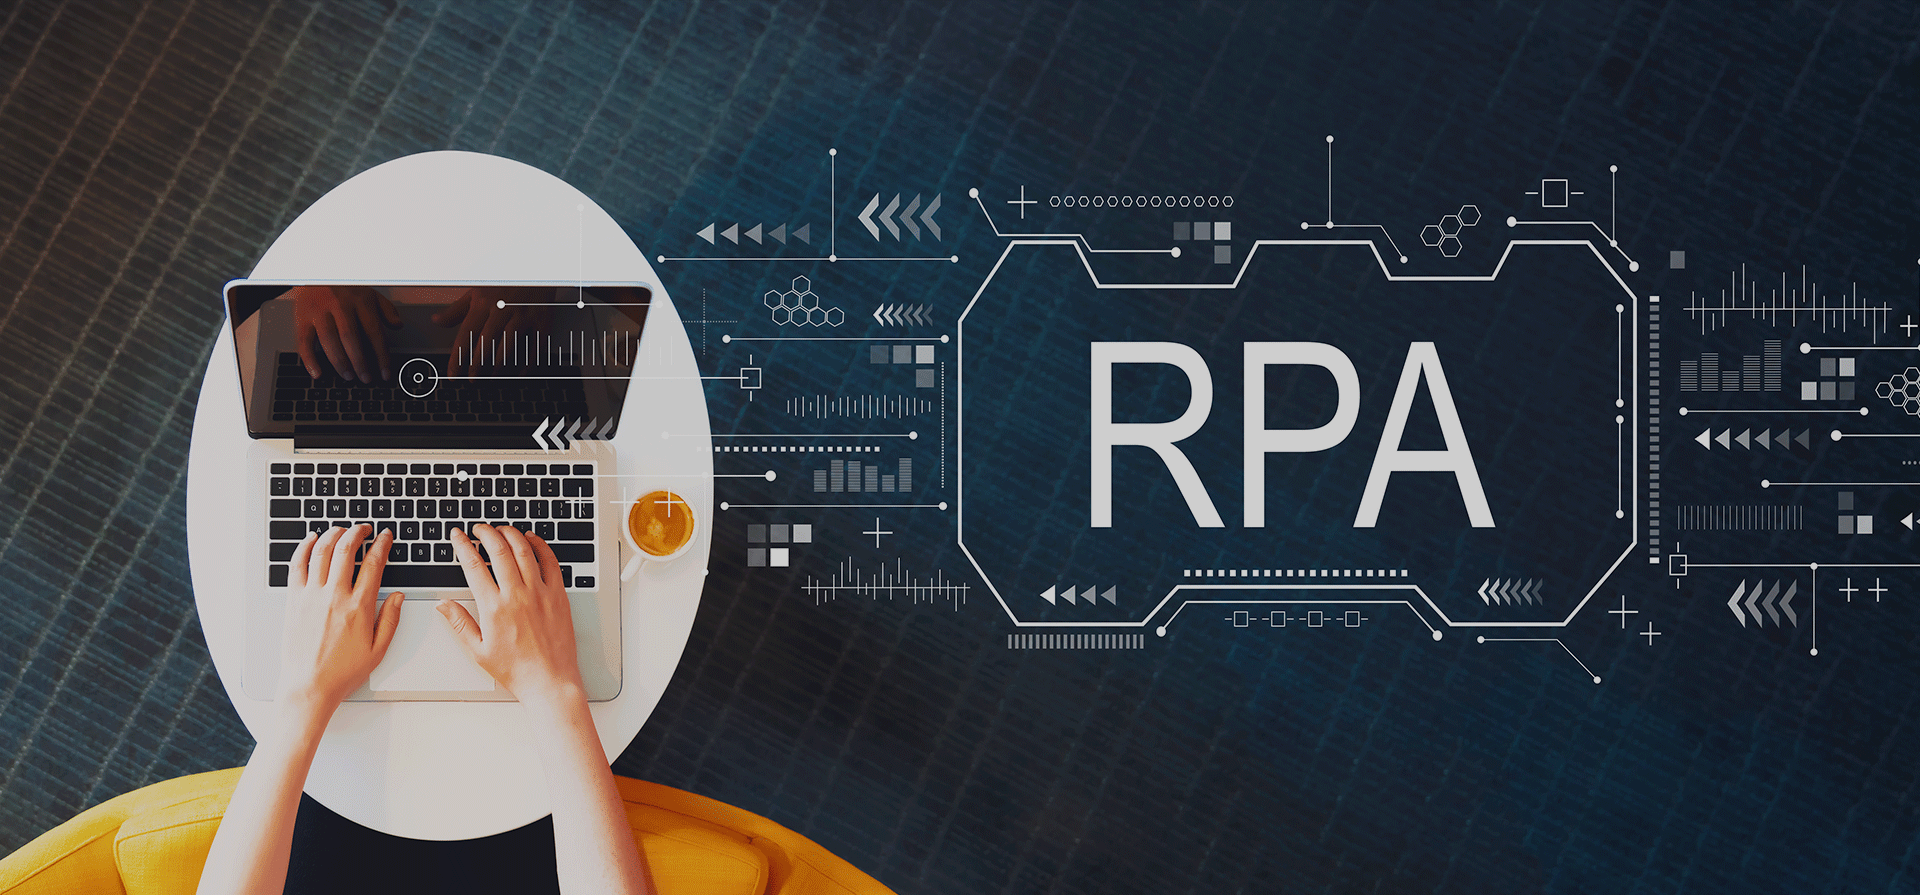 Significance-of-RPA-and-Automation-in-Uncertain-Times-like-Covid